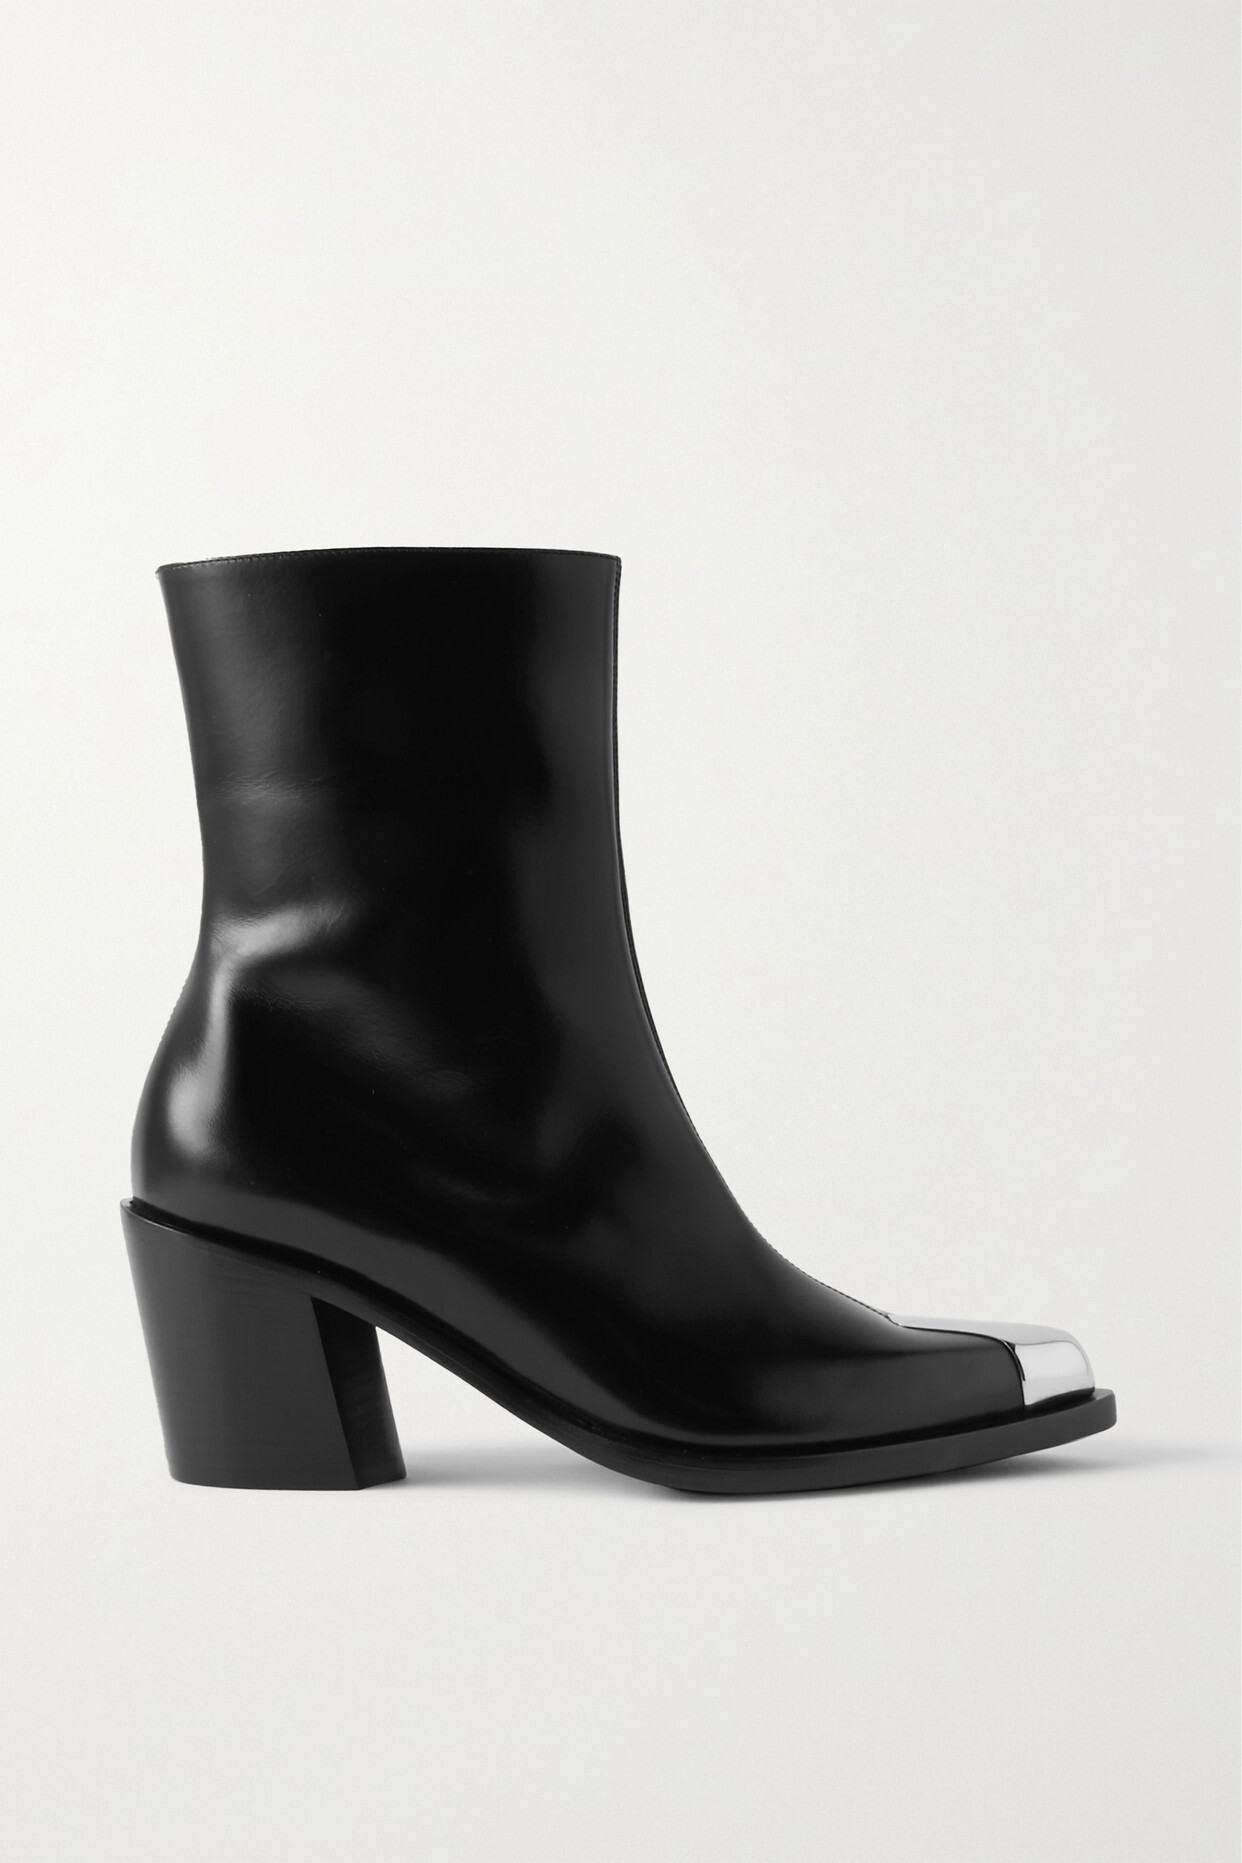 Alexander McQueen - Embellished Leather Ankle Boots - Black